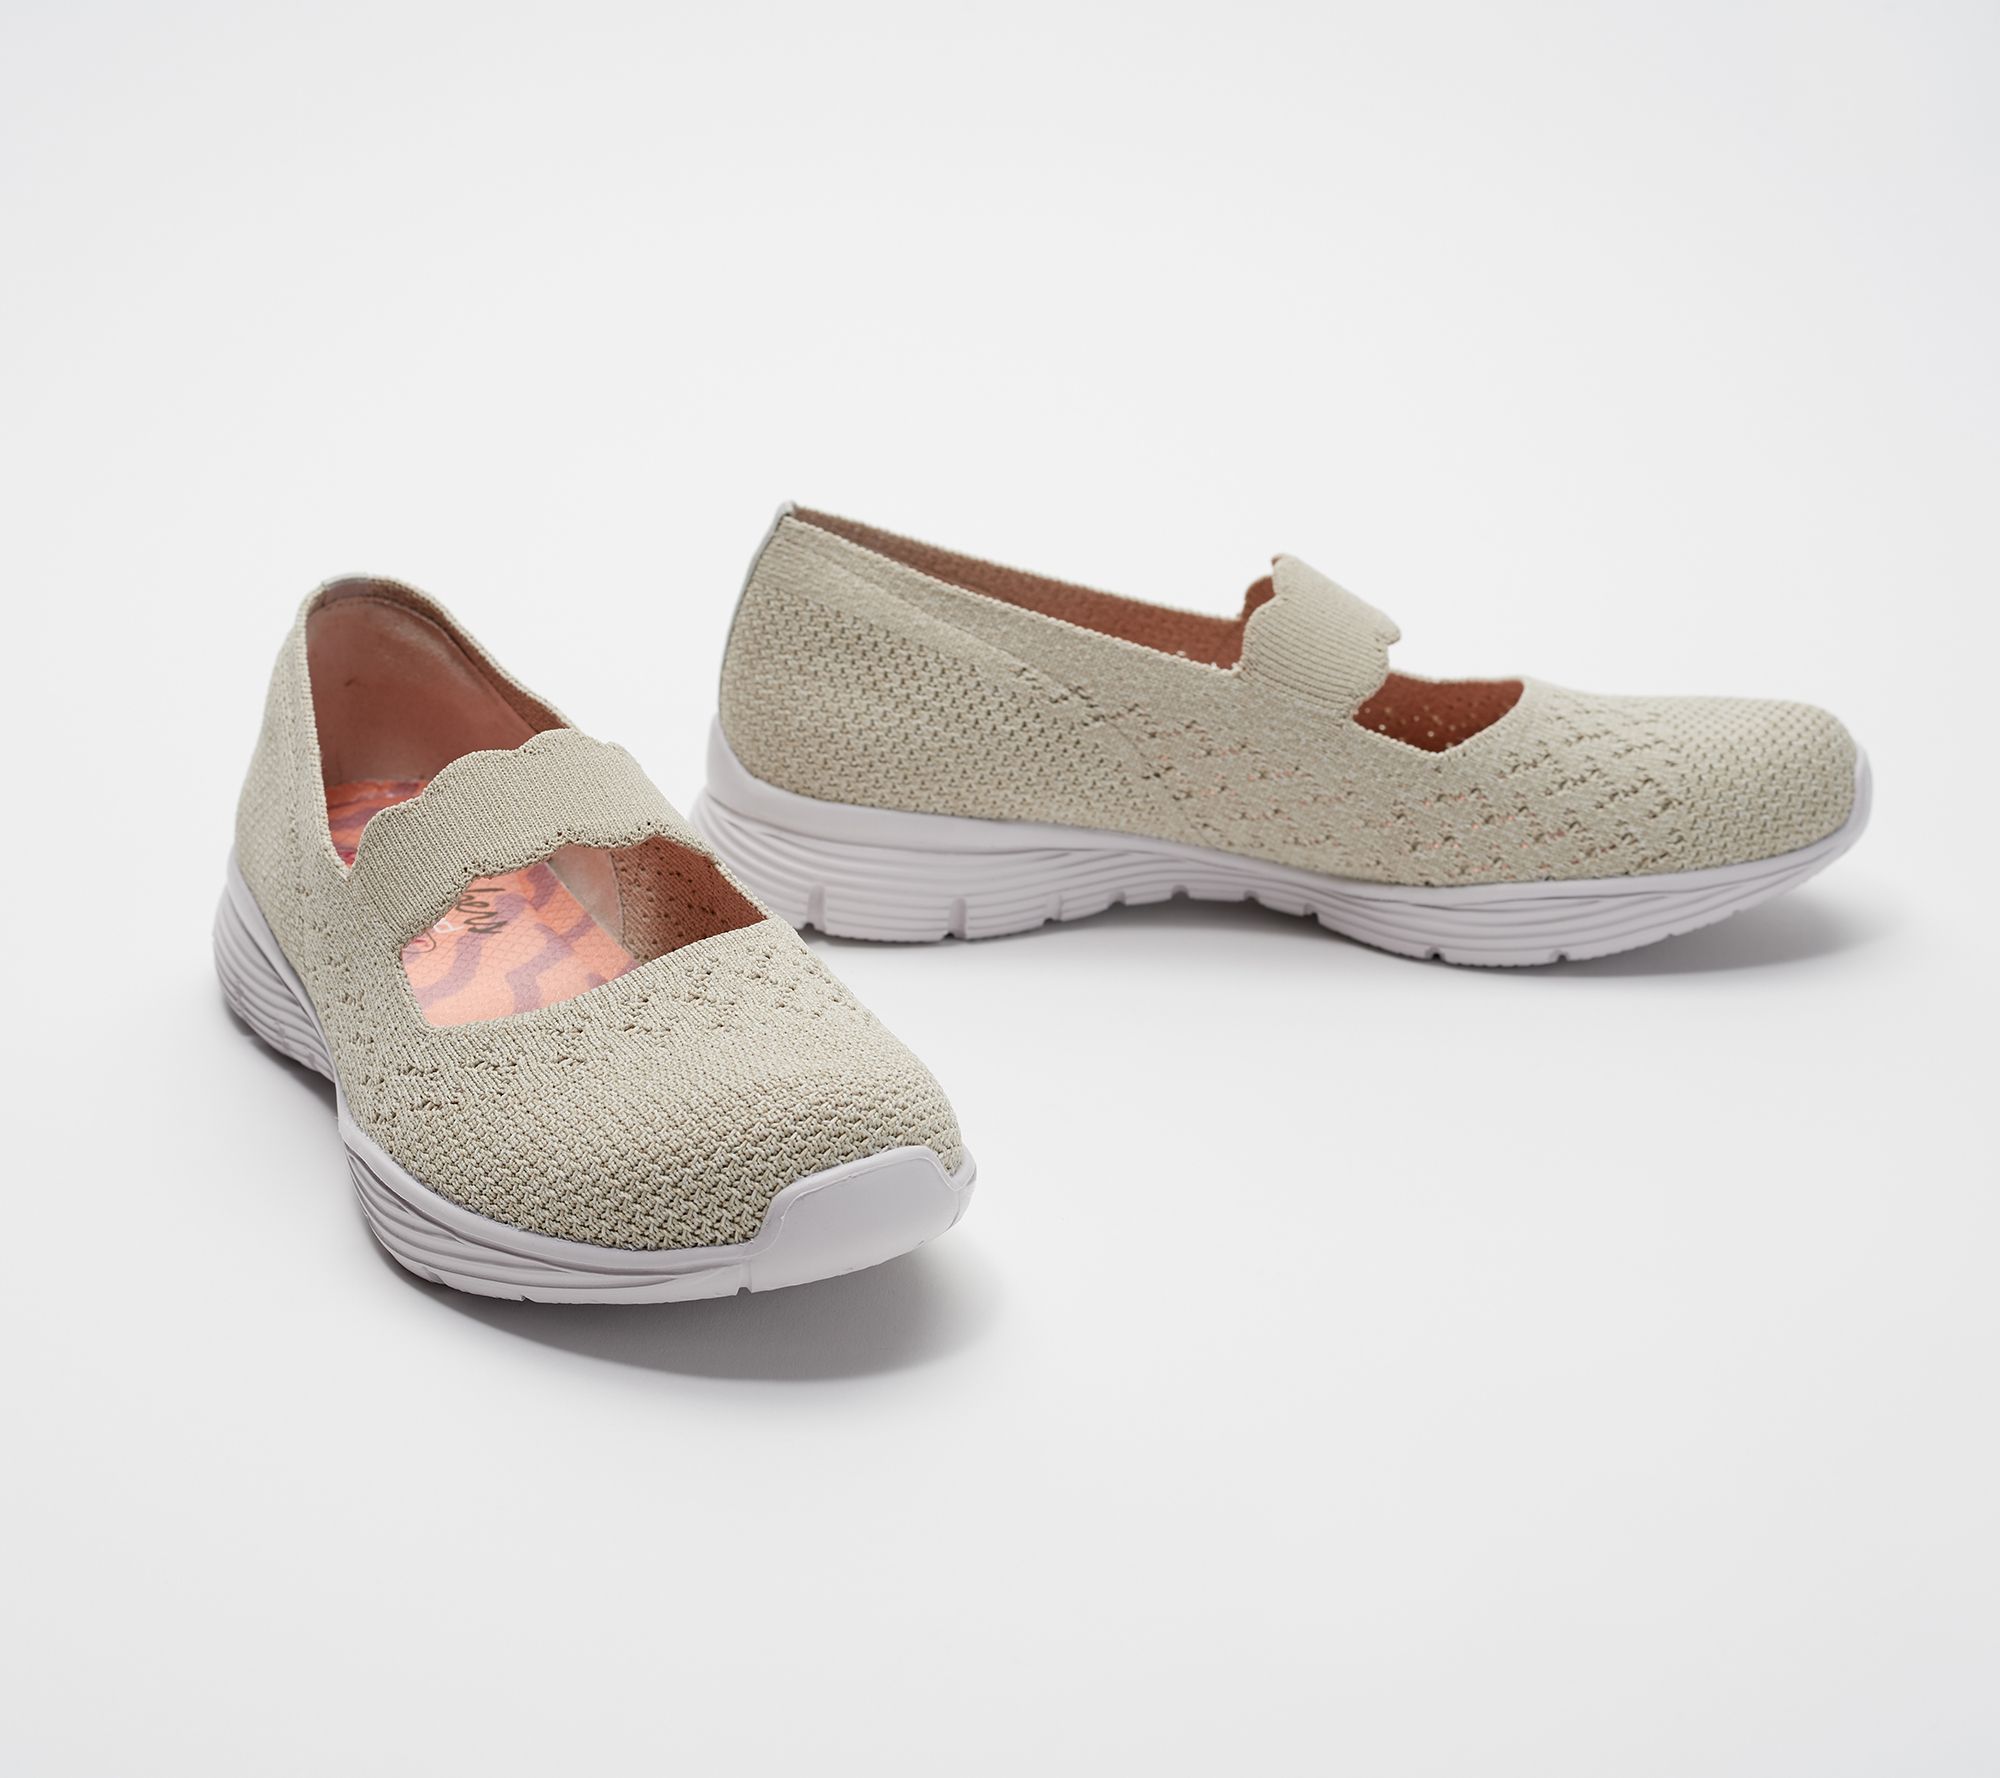 qvc skechers mary janes